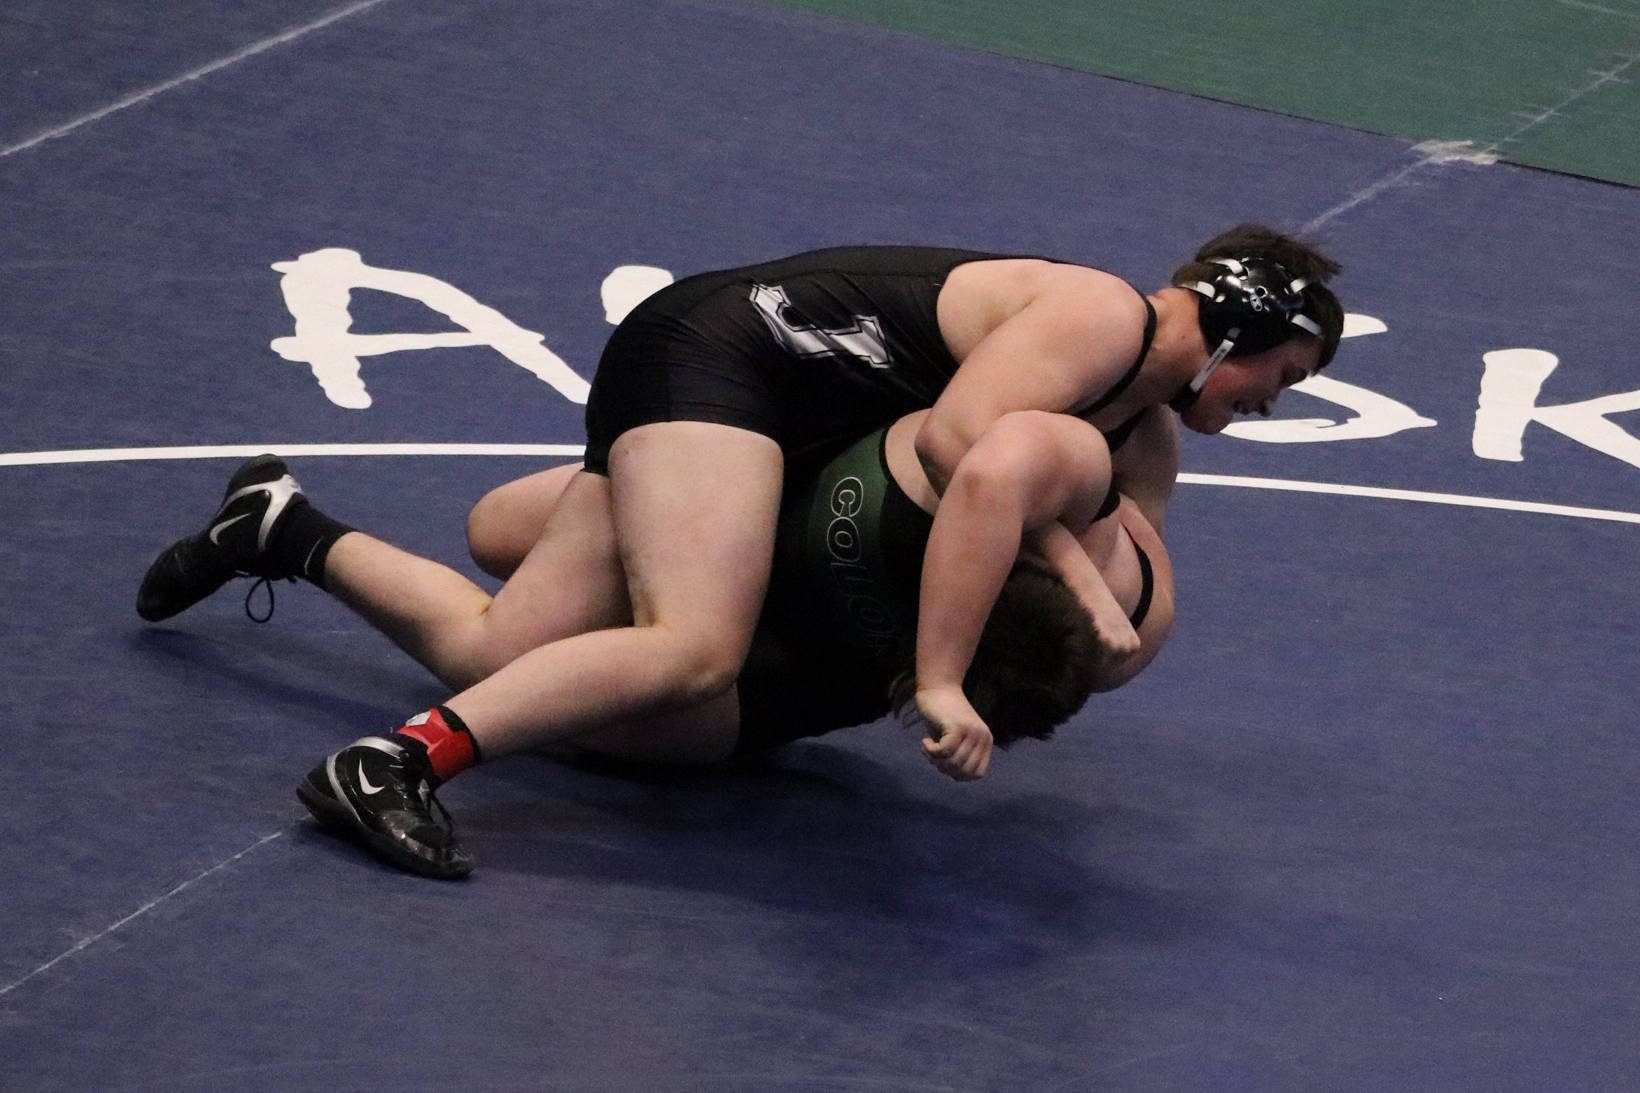 Thunder Mountain High School junior Jake Ferster takes down Colony High School’s Daniel Van Slyke in the 285-pound third-place match at the ASAA Division I state meet at the Alaska Airlines Center in Anchorage on Saturday, Dec. 22, 2019. Ferster defeated Van Slyke by way of a 6-0 decision to take third overall in the 285-pound weight class. (Courtesy Photo | Kristie Erickson)